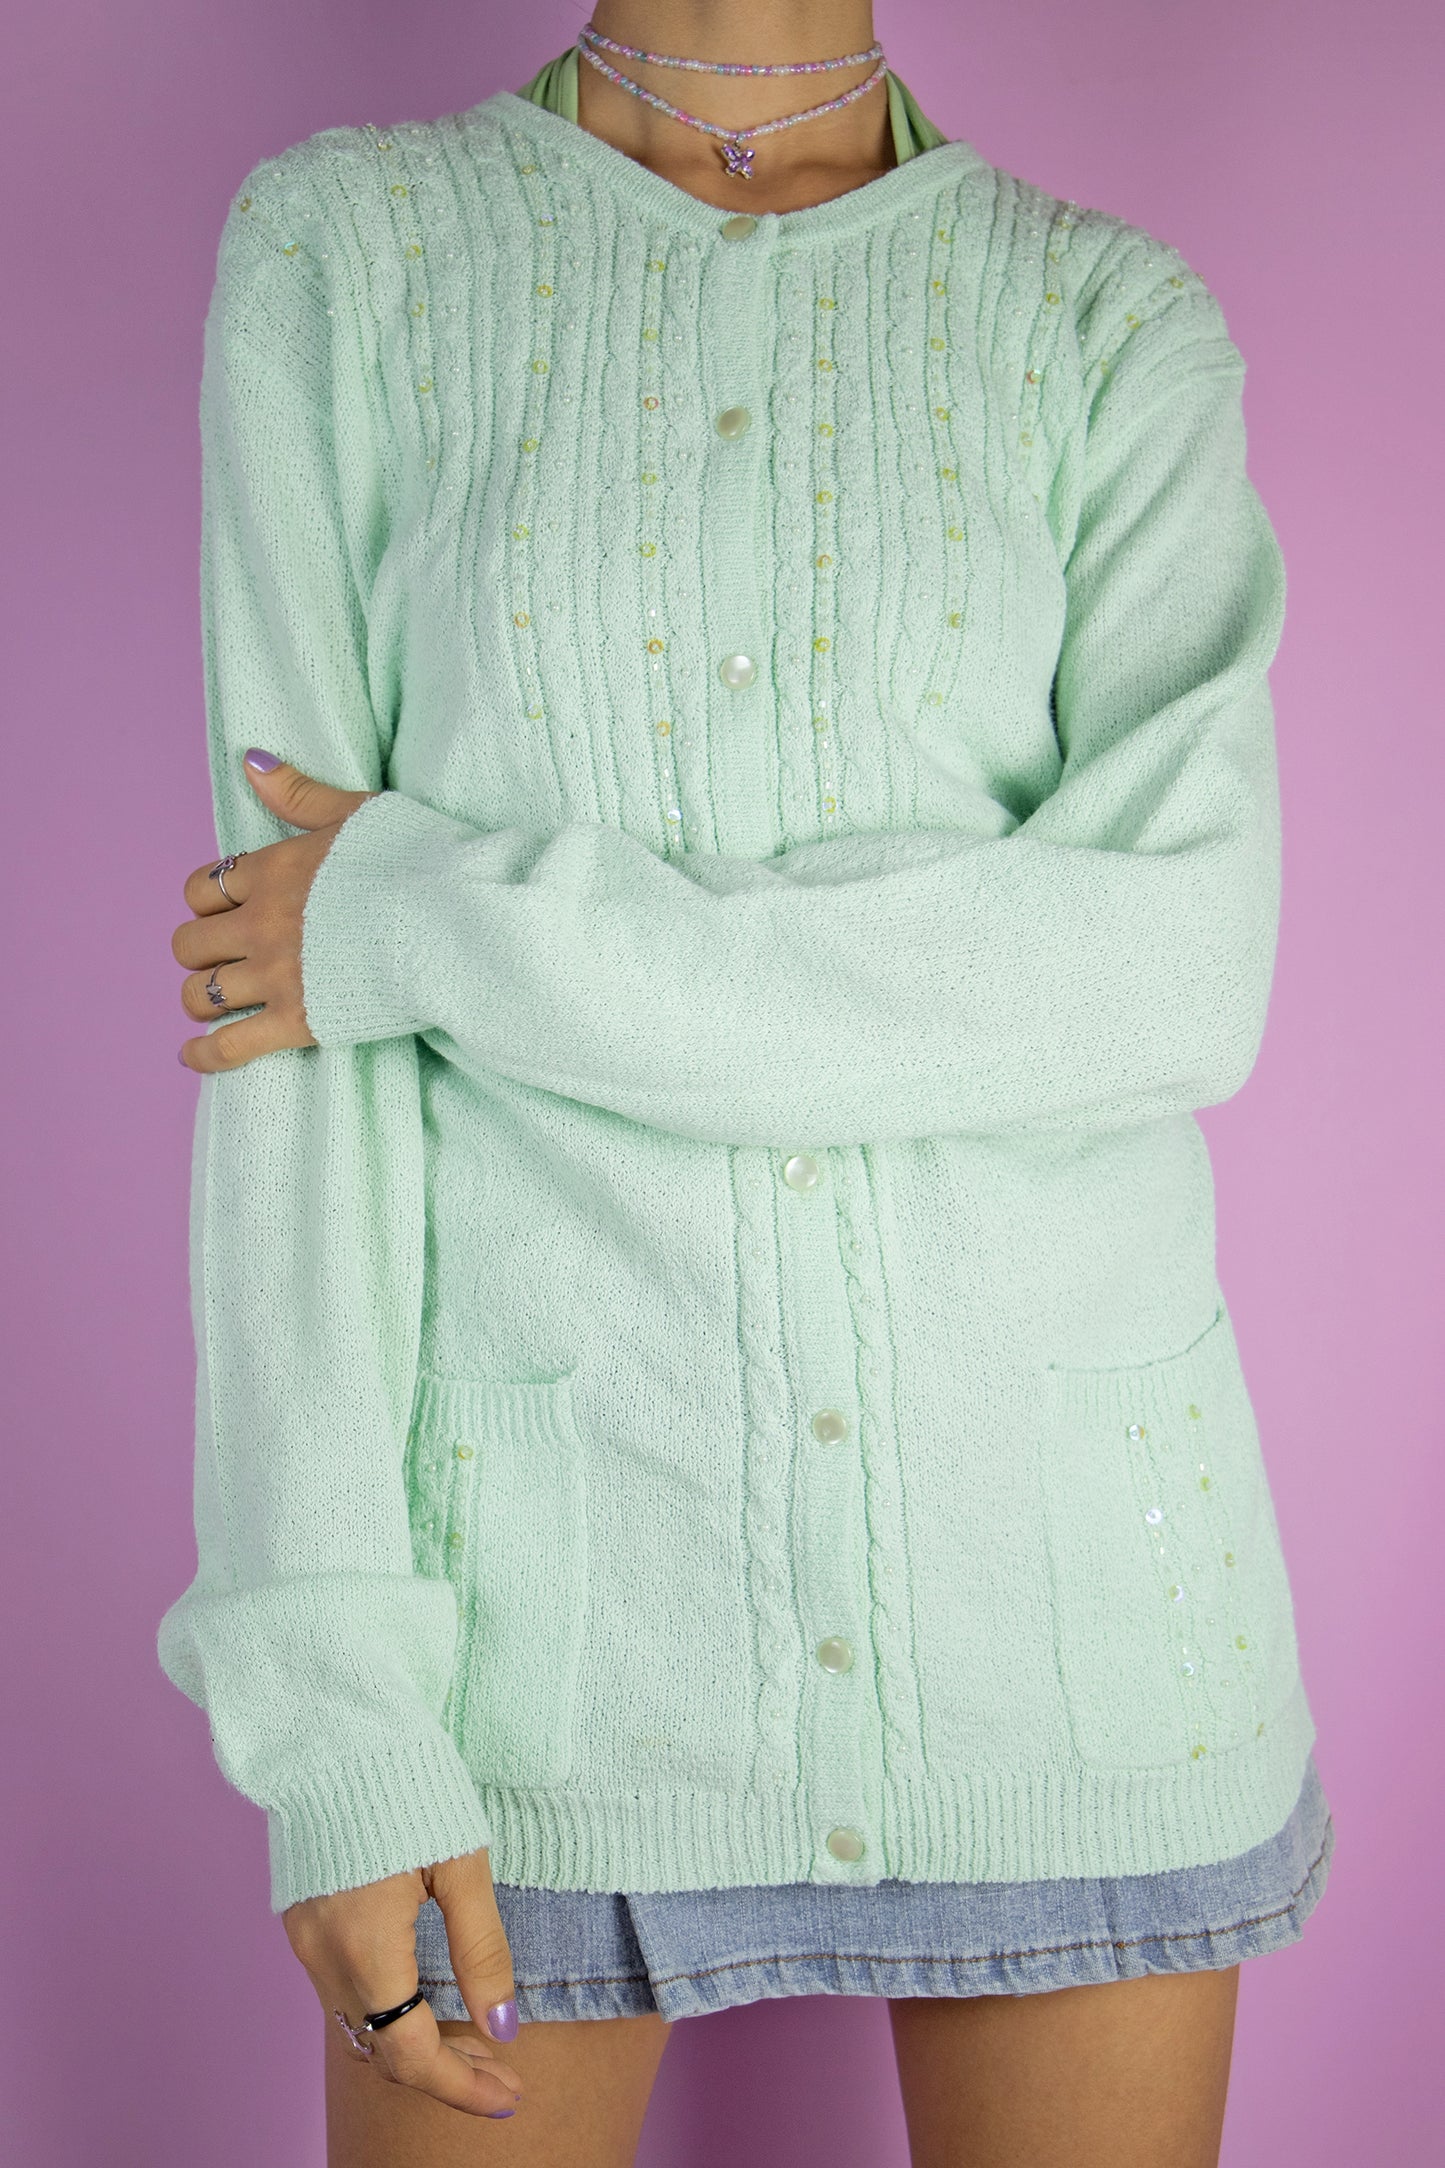 The Y2K Green Beaded Knit Cardigan is a vintage 2000s romantic pastel light mint green embellished sweater with pockets and bead and sequin detail.